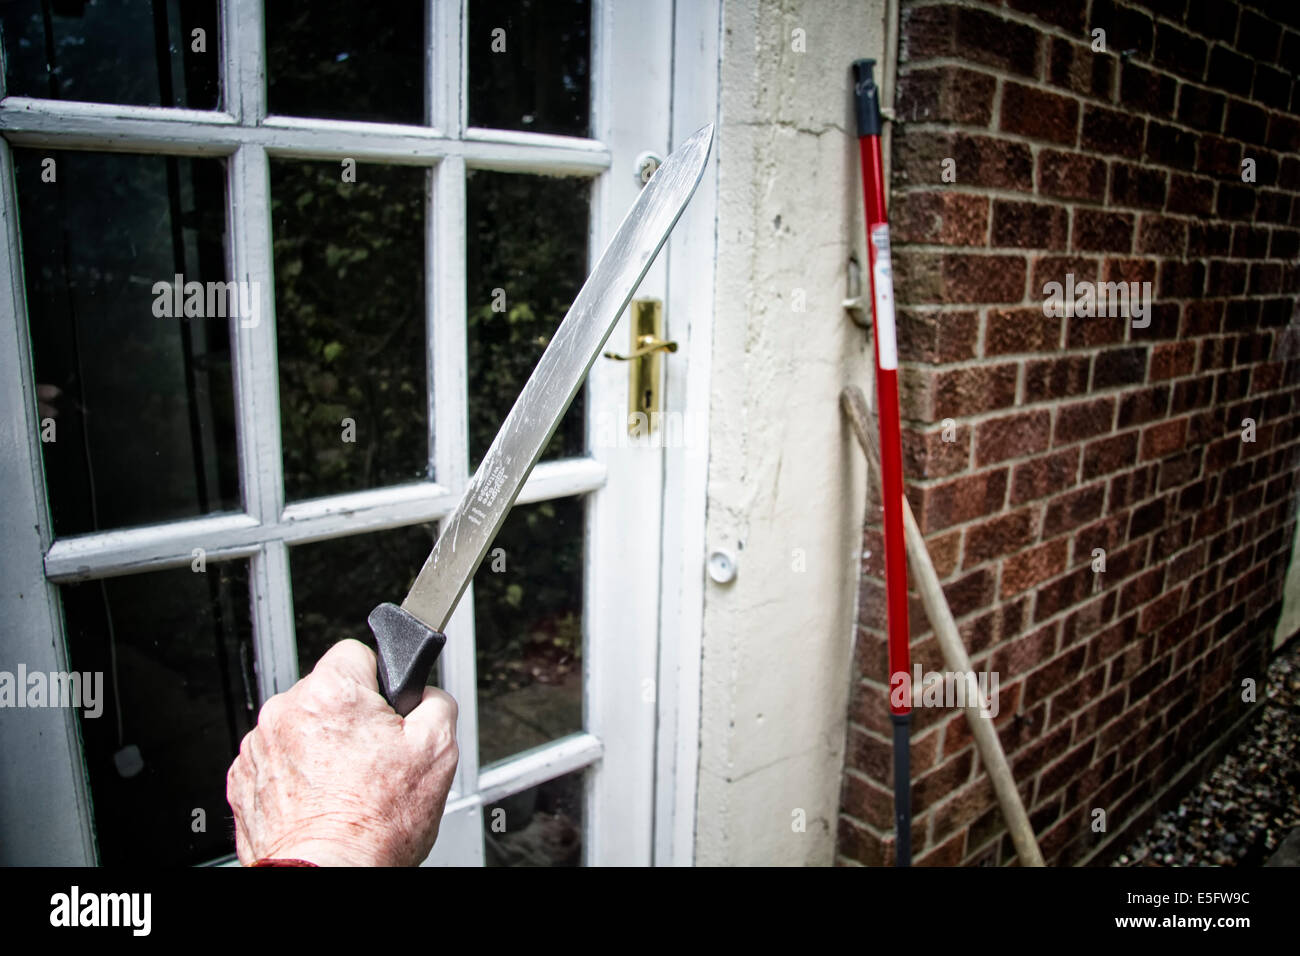 Male hand holding a large kitchen knife approaching the door to a house Stock Photo